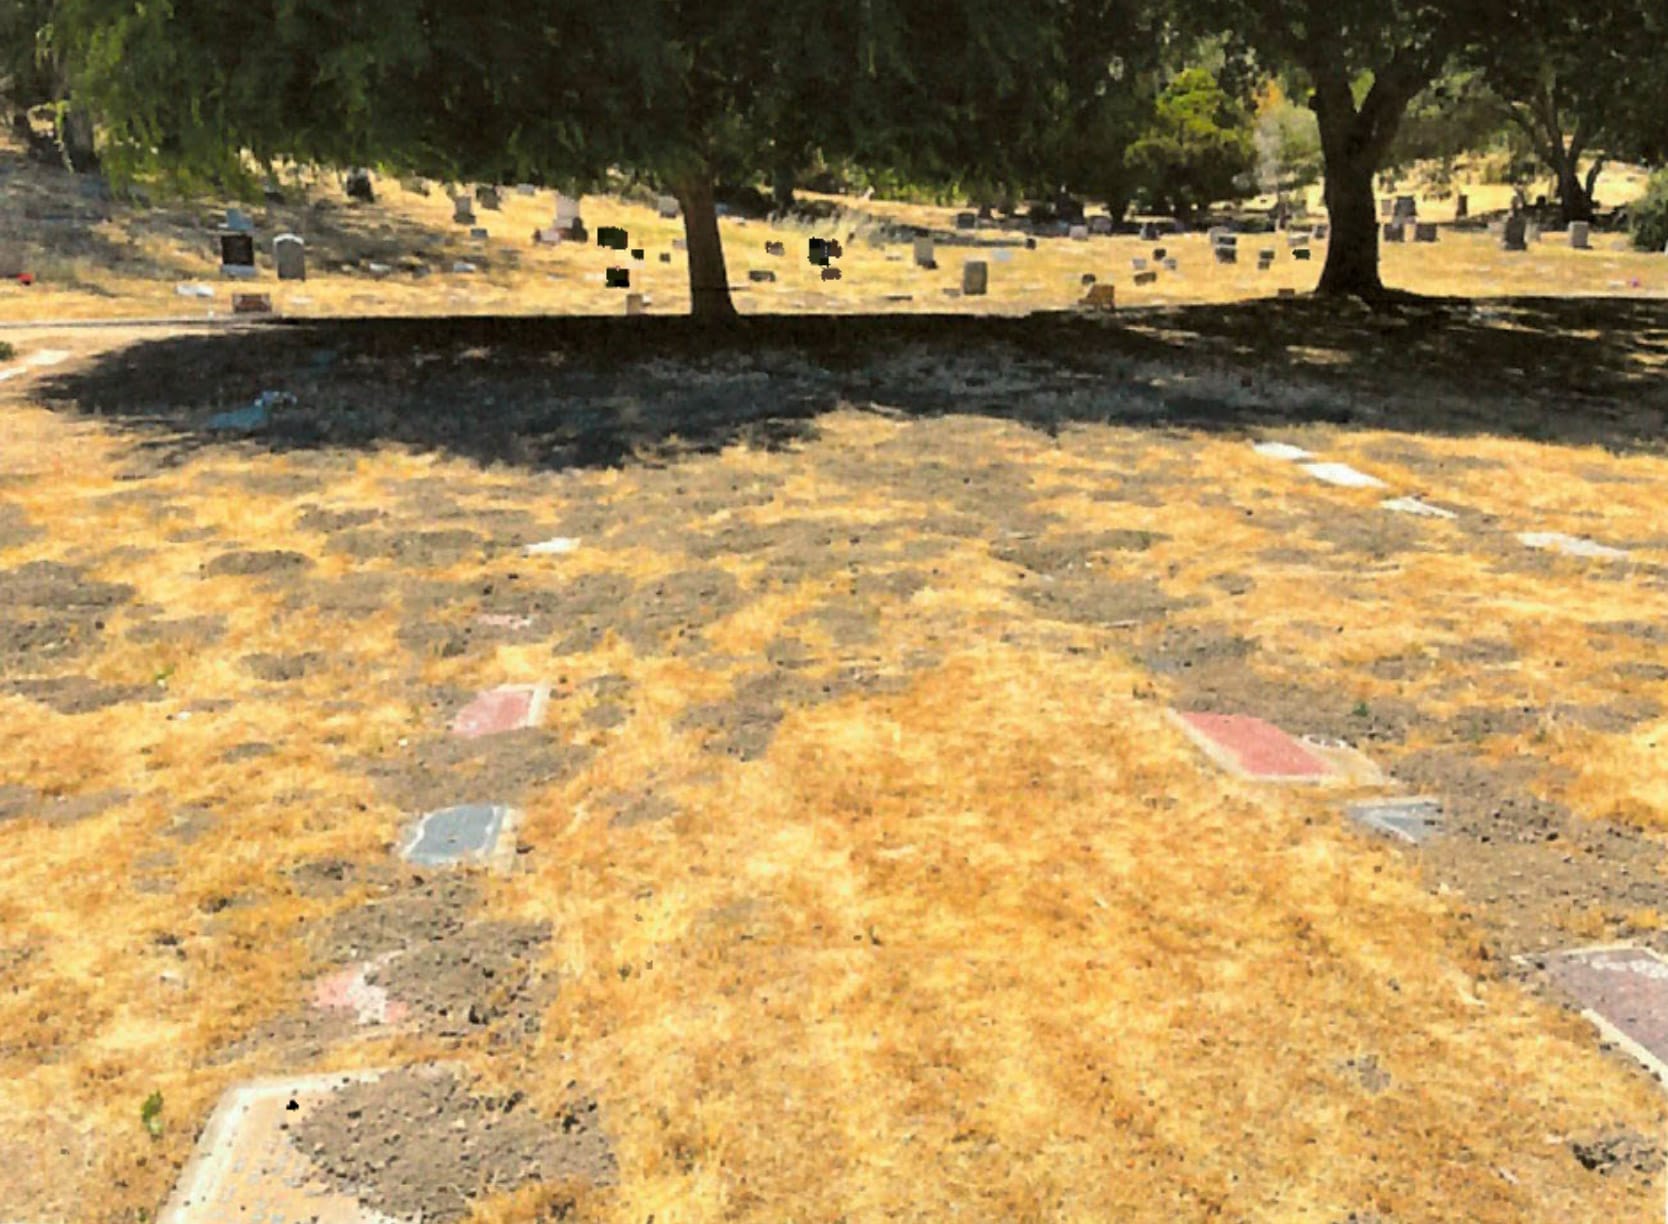 A photo of Mt. Tamalpais cemetery taken by Sue Birkenseer shows dried grass and dirt on headstones.